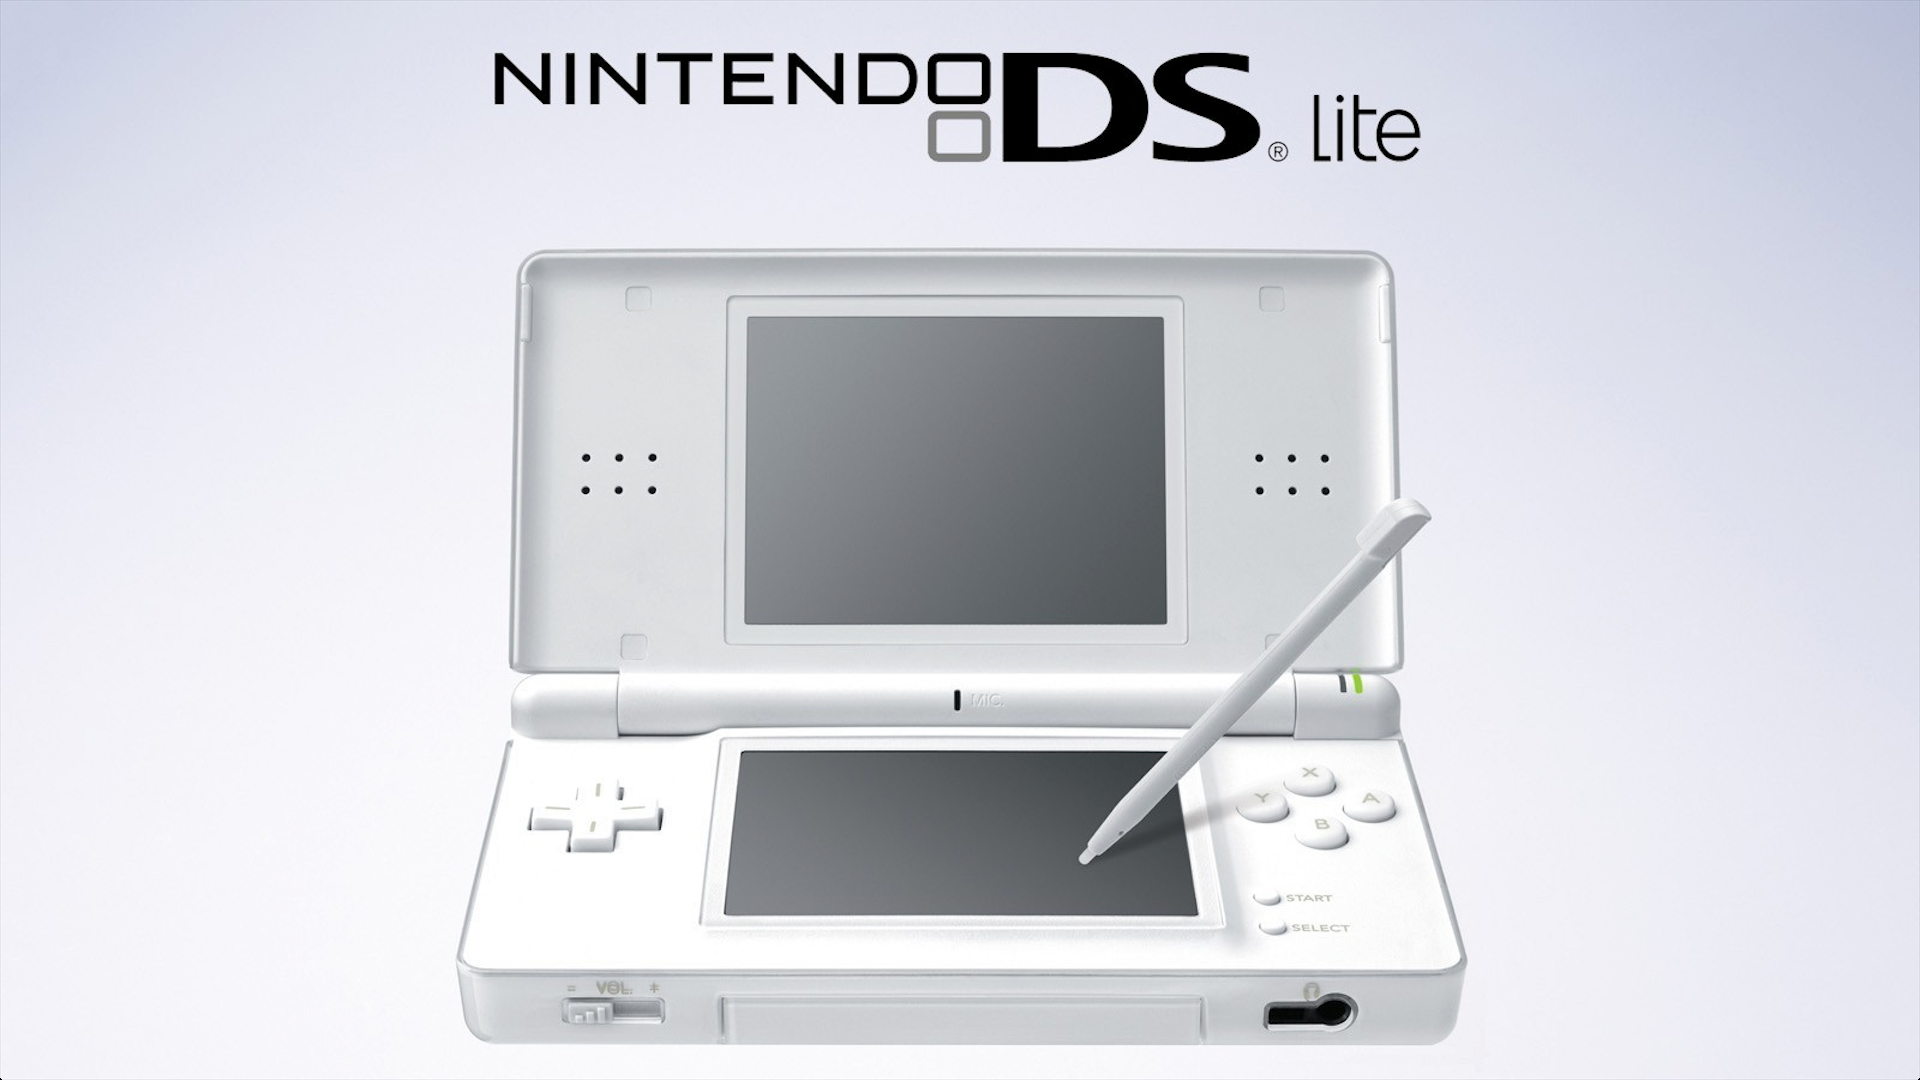 How To Connect A Nintendo DS/DS Lite To WiFi | by Ronak | Medium